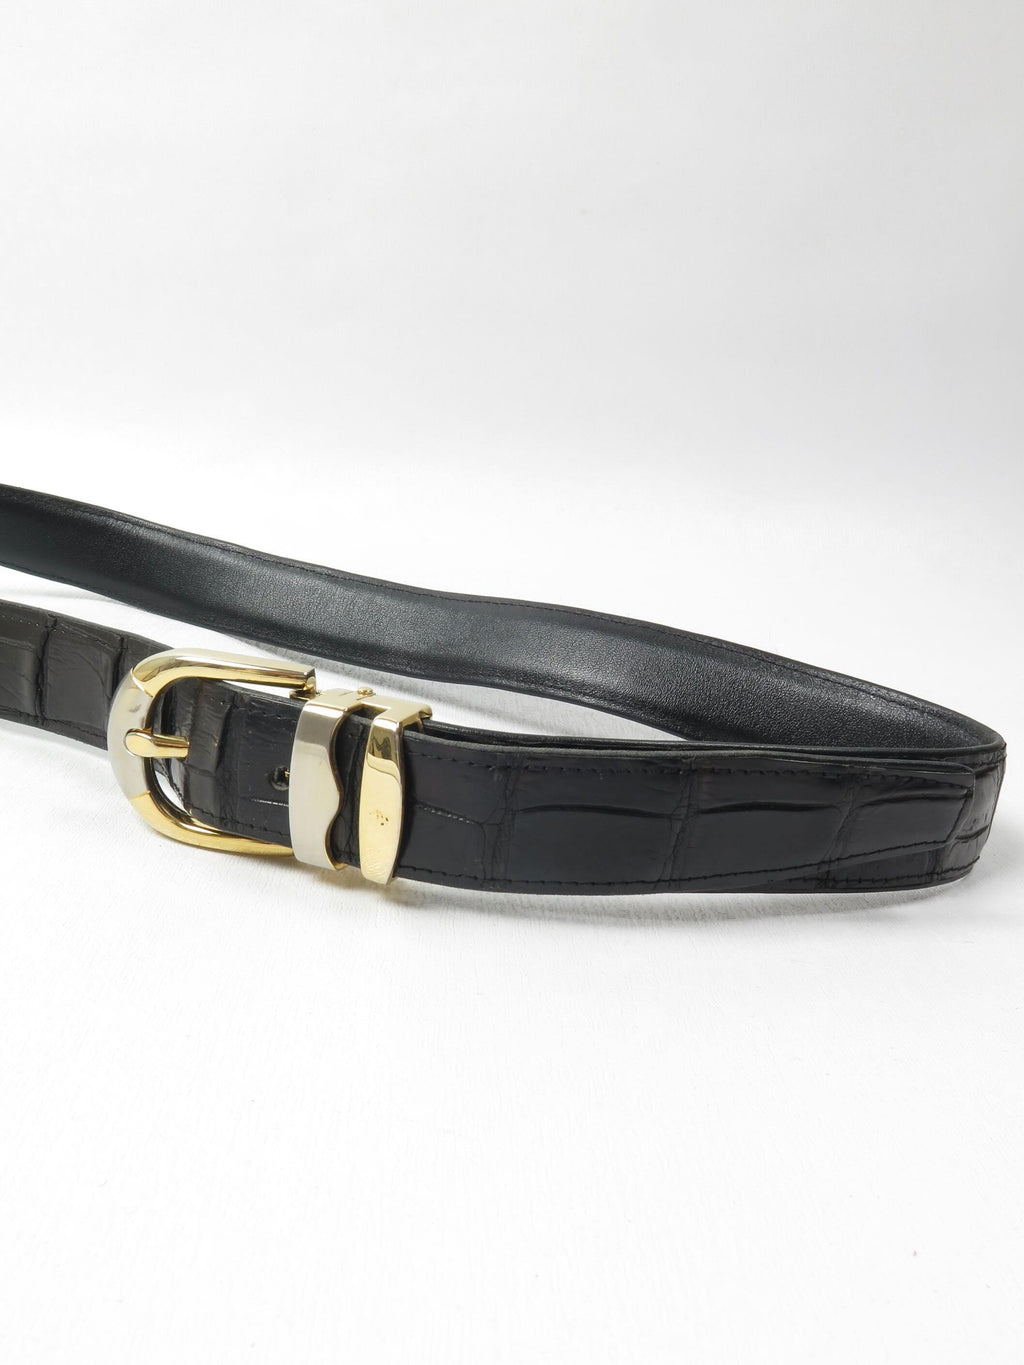 Women's Vintage Black Leather Belt With Texture S - The Harlequin